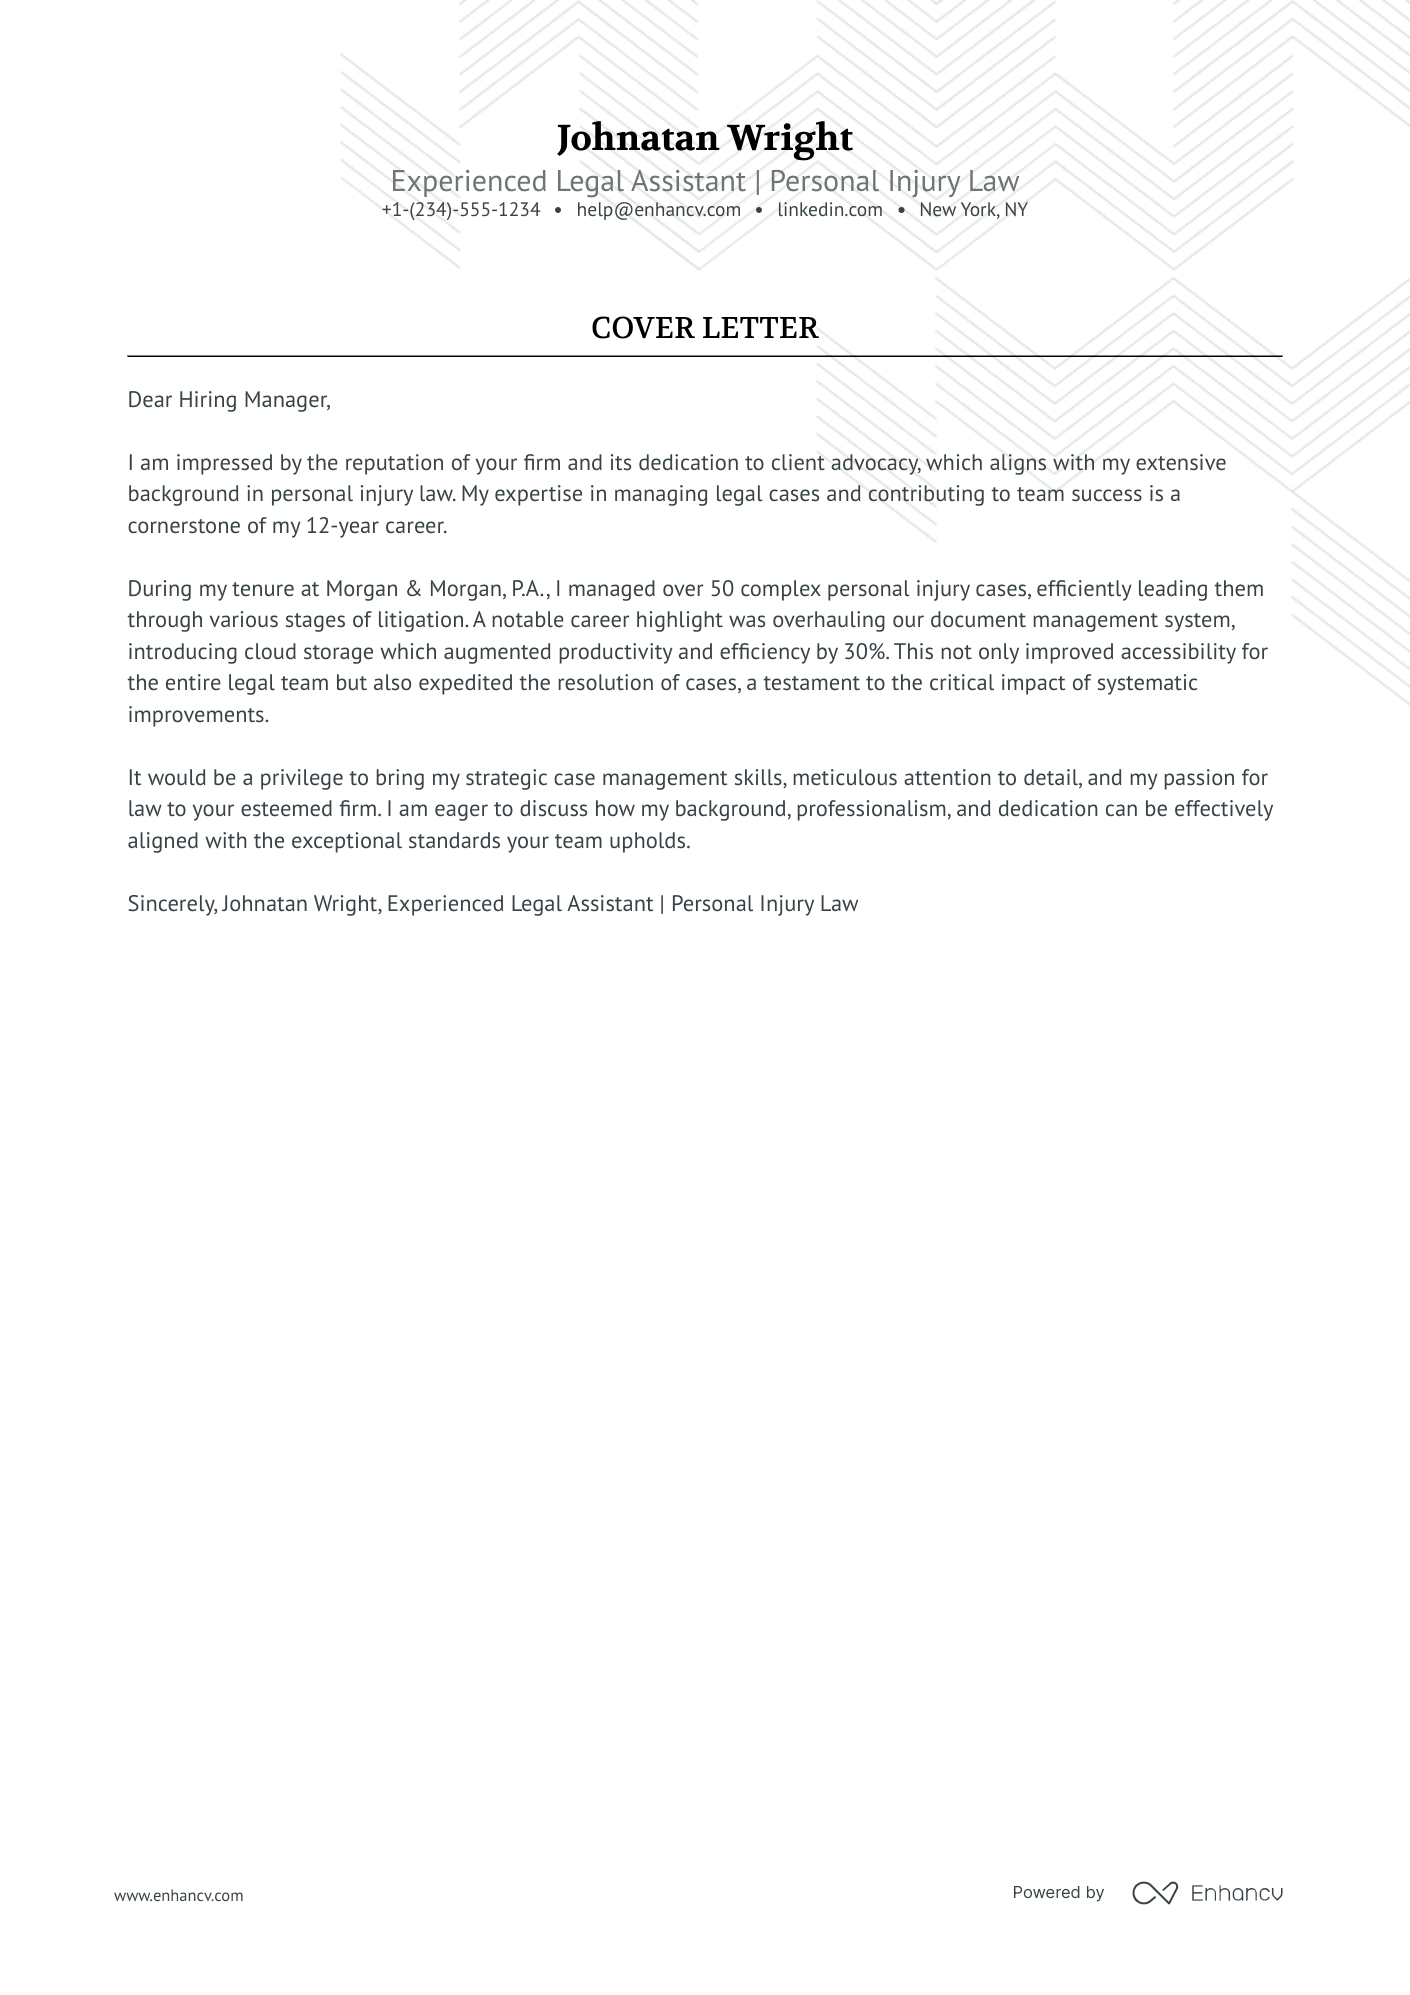 legal assistant cover letter with no experience